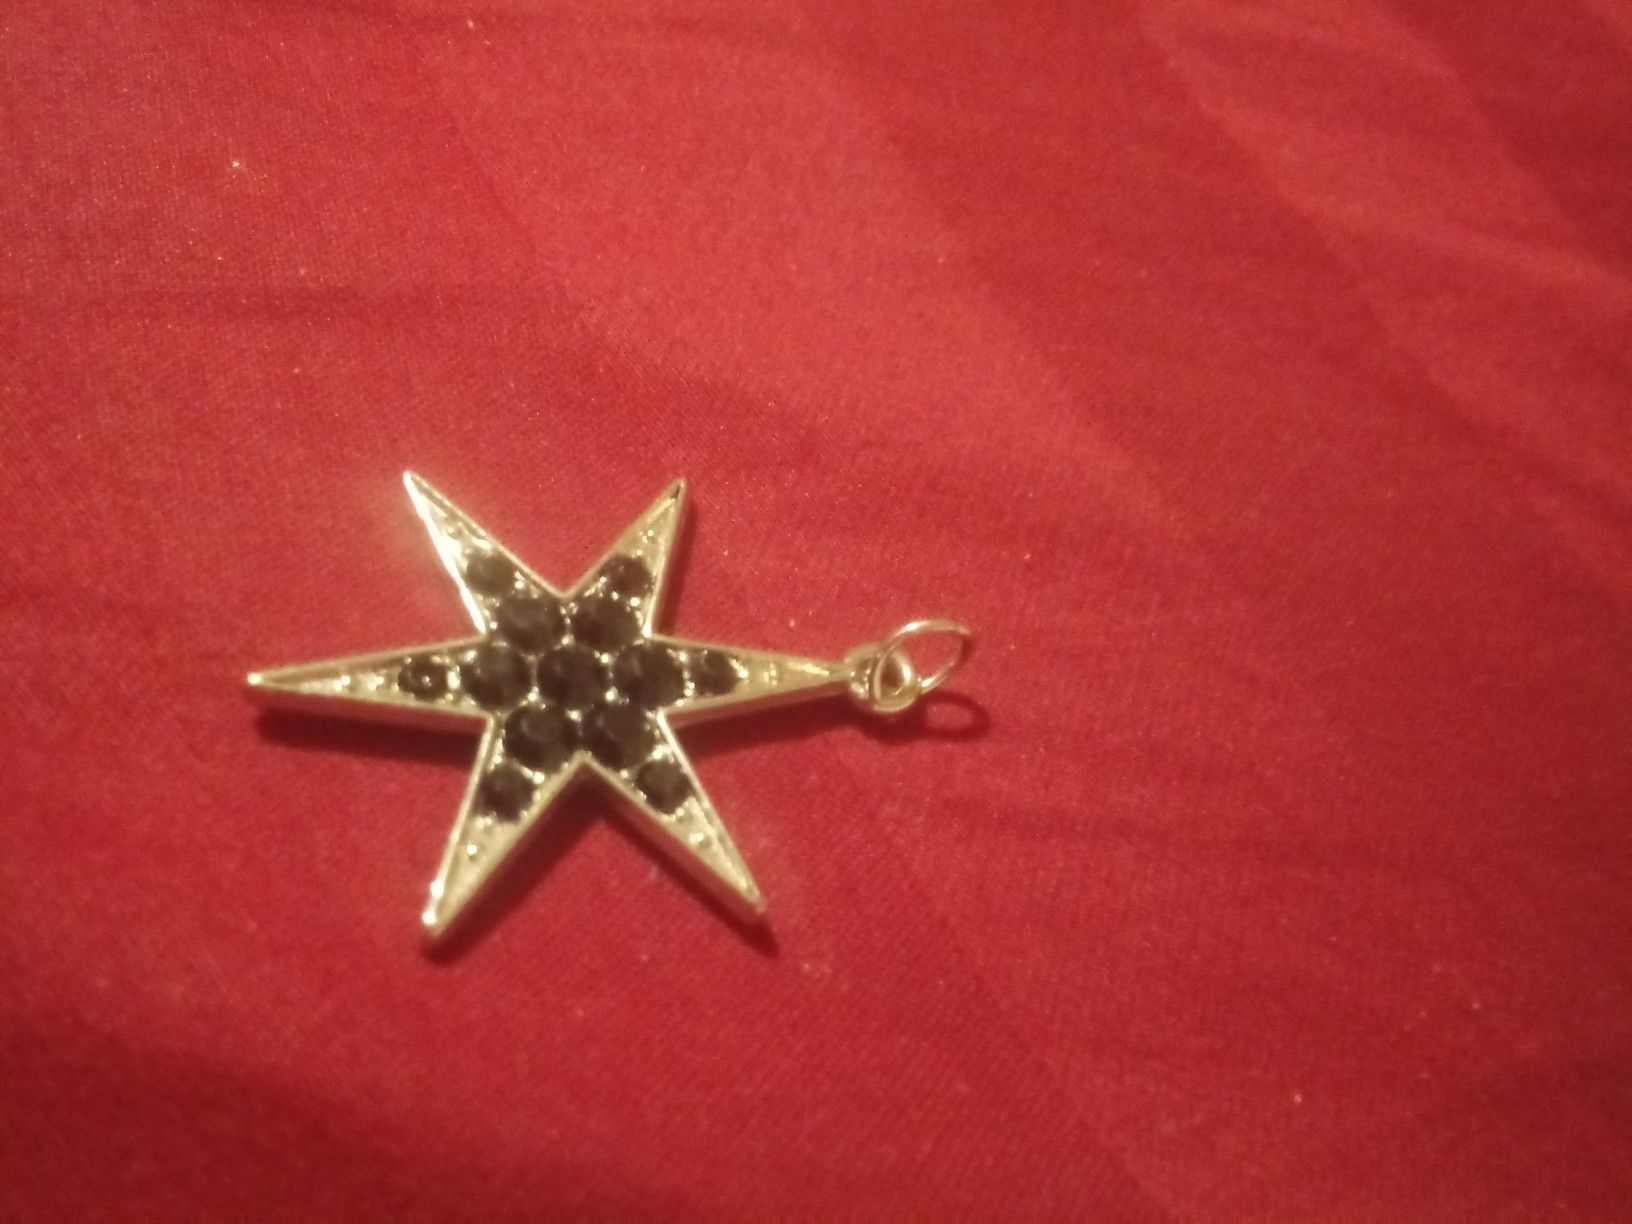 Star charm for a necklace